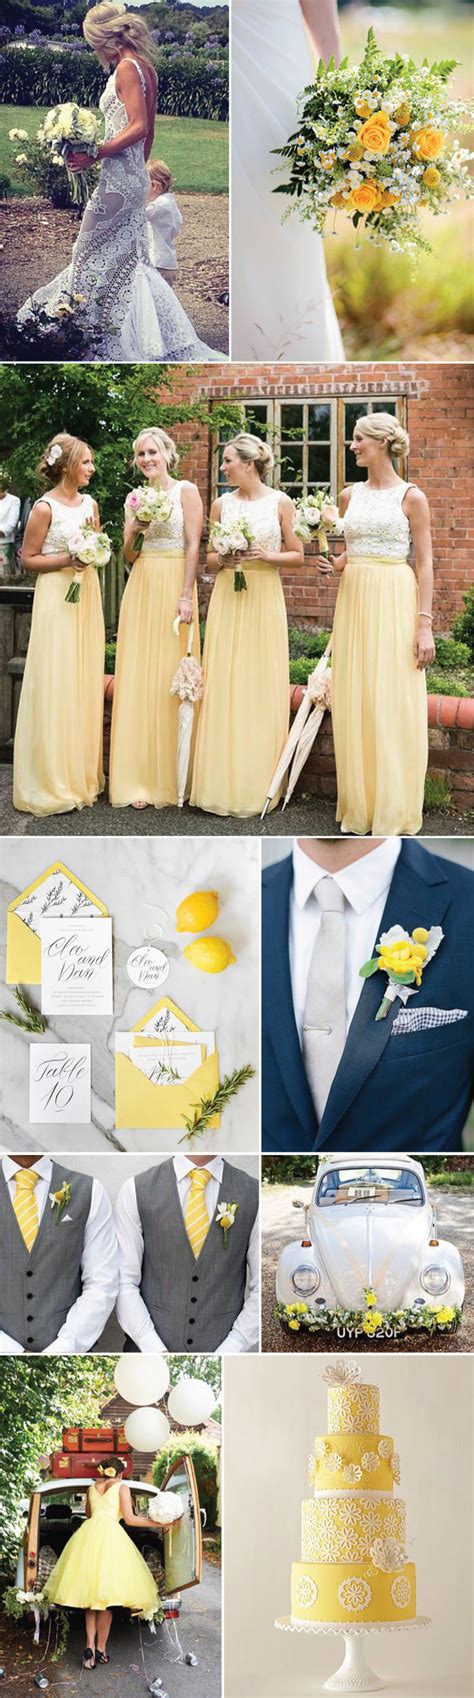 Wedding Inspiration For Citrus Yellow Groomsmen Ties And Bow Ties In